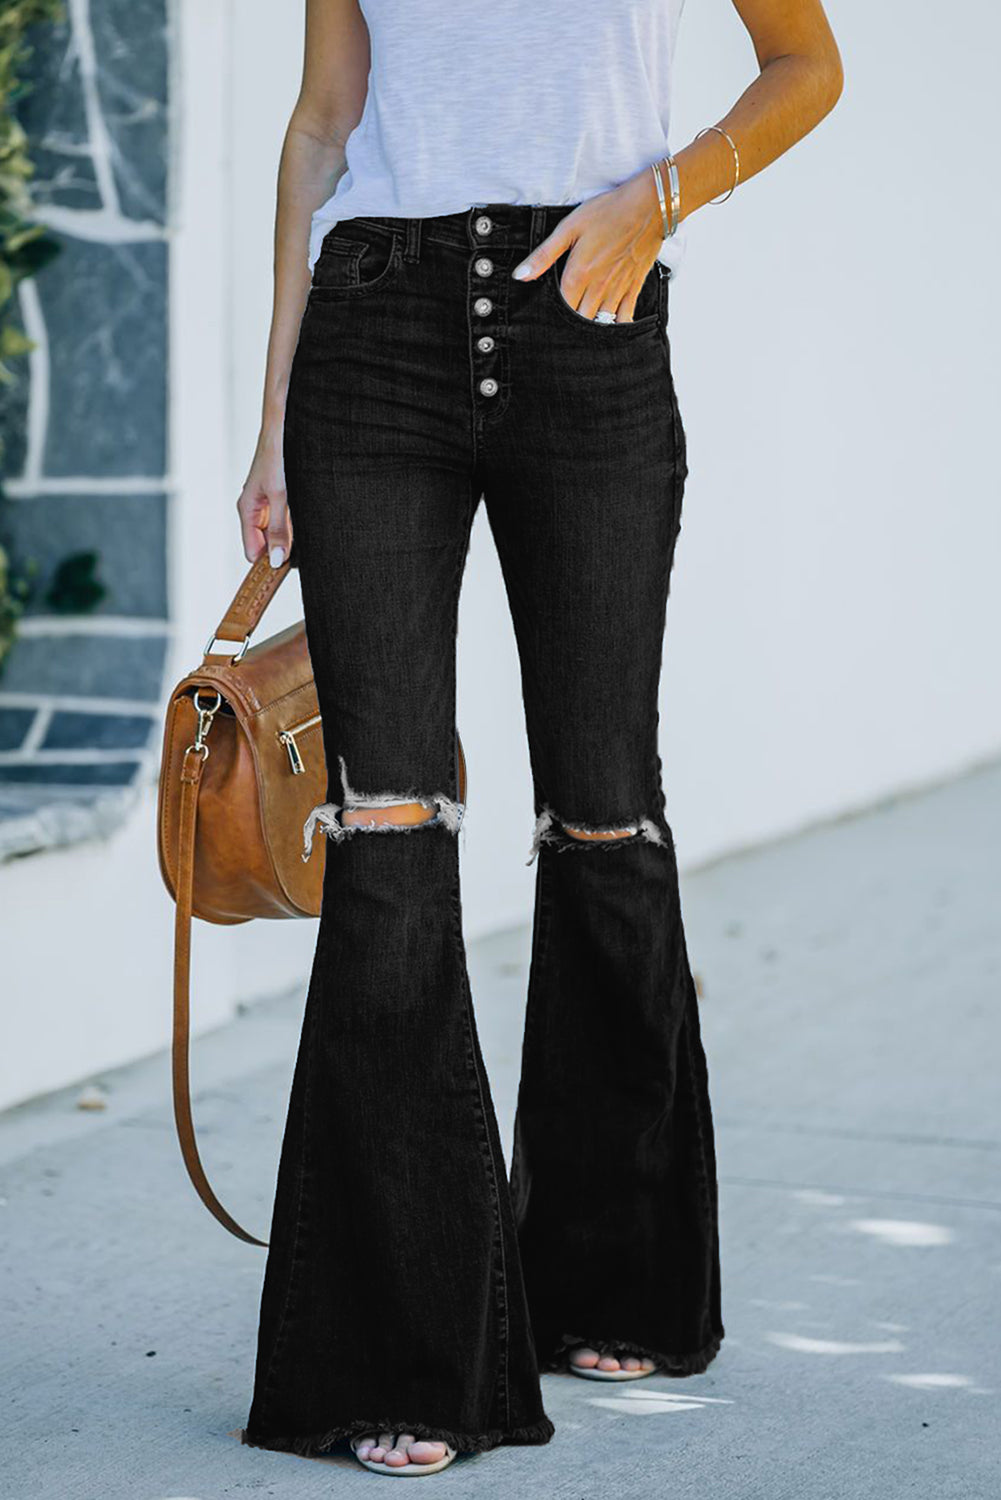 Black Casual Ripped Cut Out Flare Jeans Black 71%Cotton+27.5%Polyester+1.5%Elastane Jeans JT's Designer Fashion